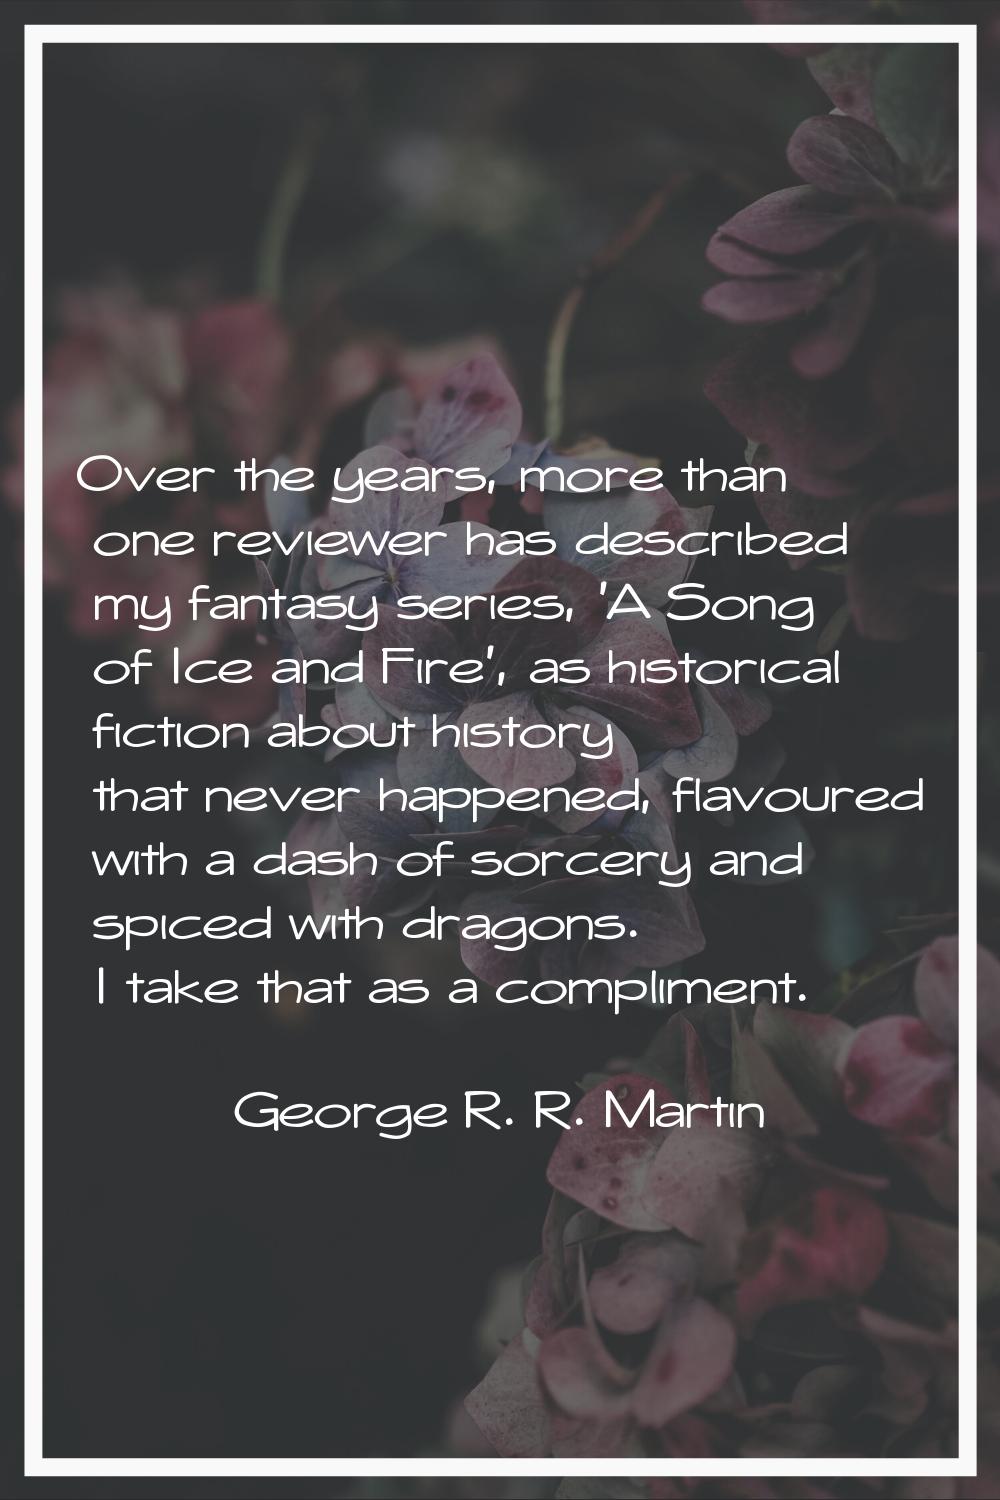 Over the years, more than one reviewer has described my fantasy series, 'A Song of Ice and Fire', a